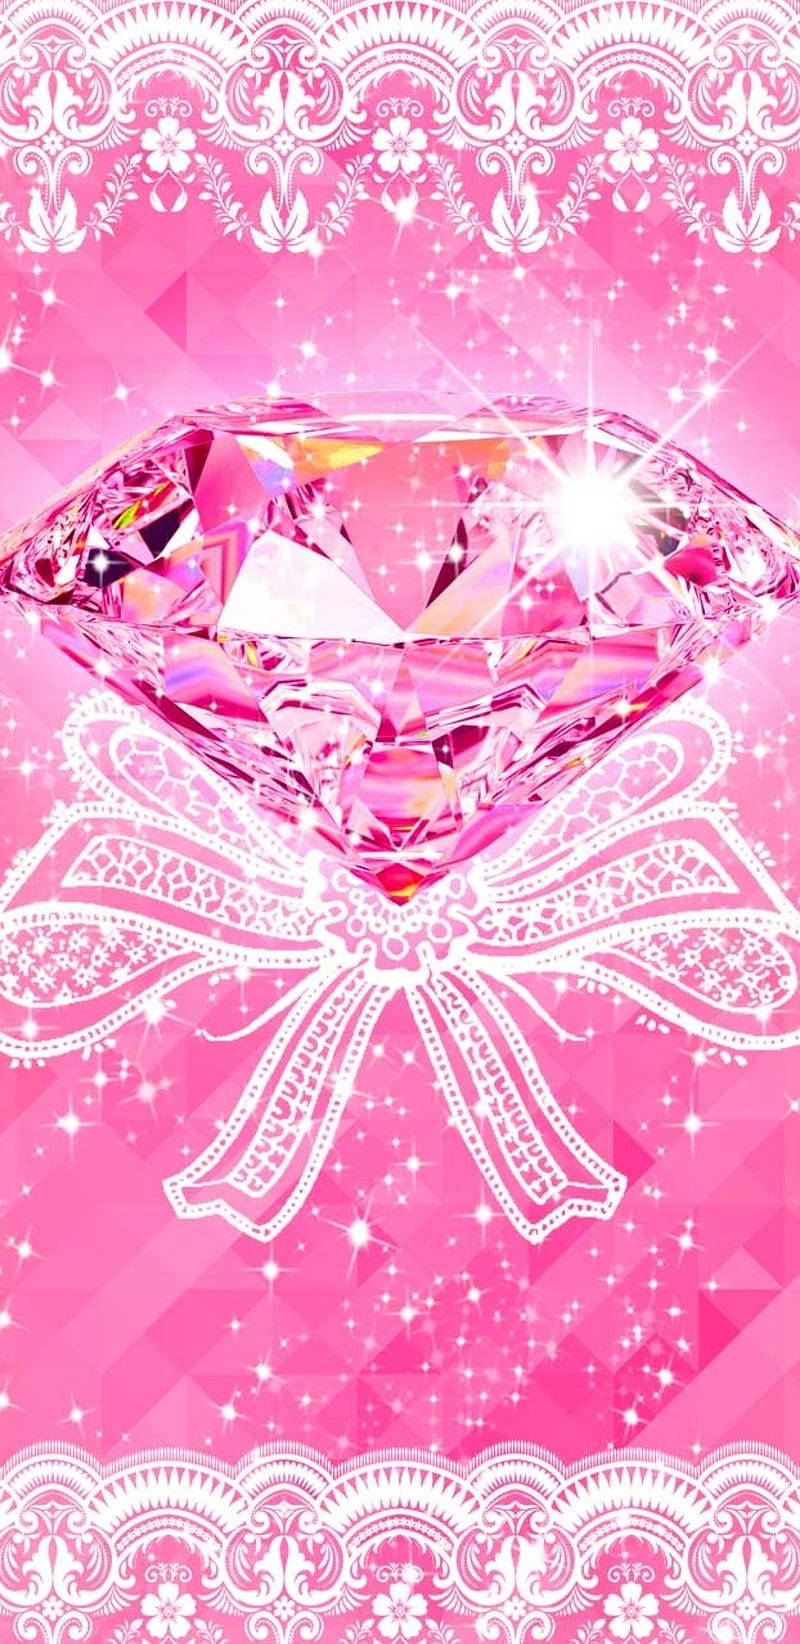 Exquisite Pink Diamond In Shimmering Light Background